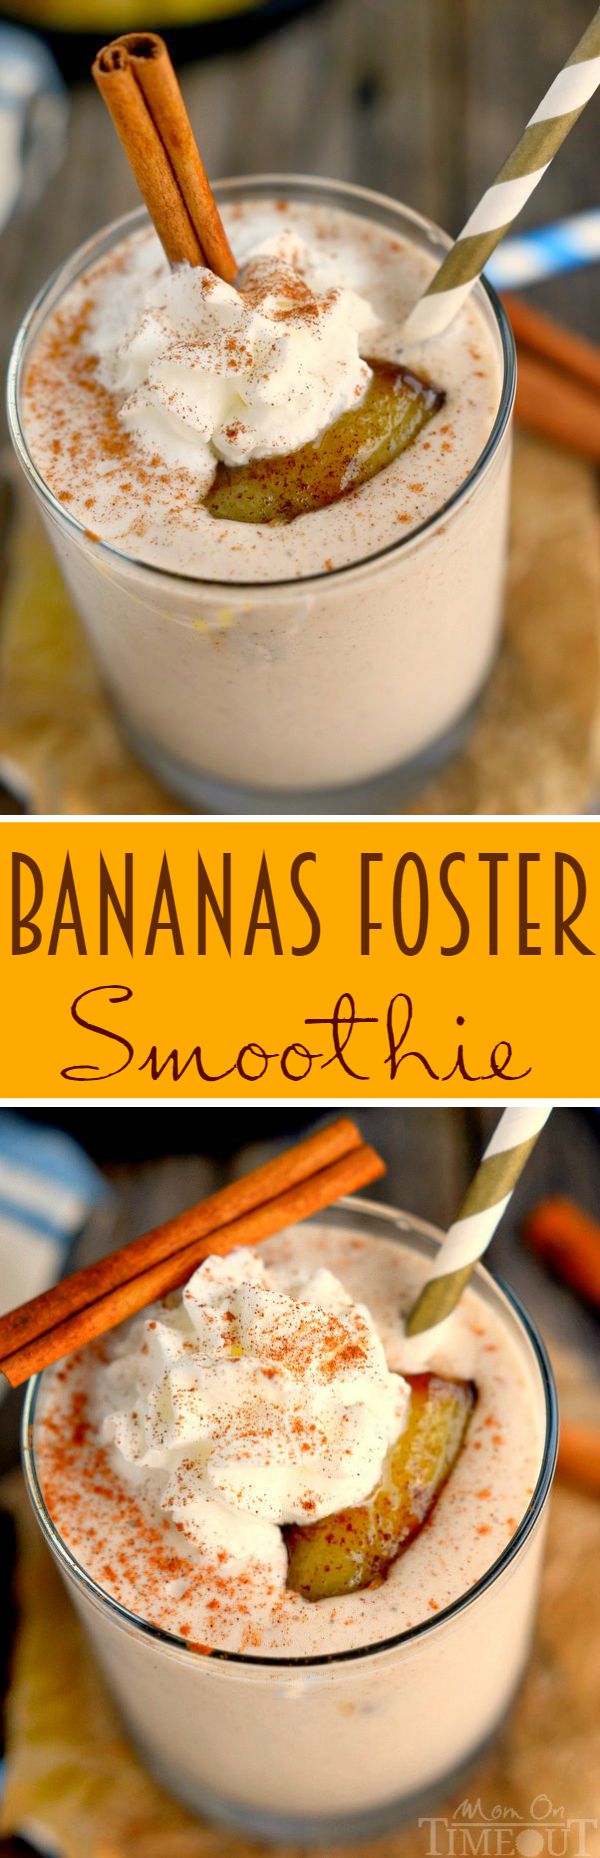 You'll want to wake up to this Bananas Foster Smoothie! Yummy banana and caramel flavors in a protein-packed smoothie - delicious! A sweet and easy breakfast recipe. | MomOnTimeout.com